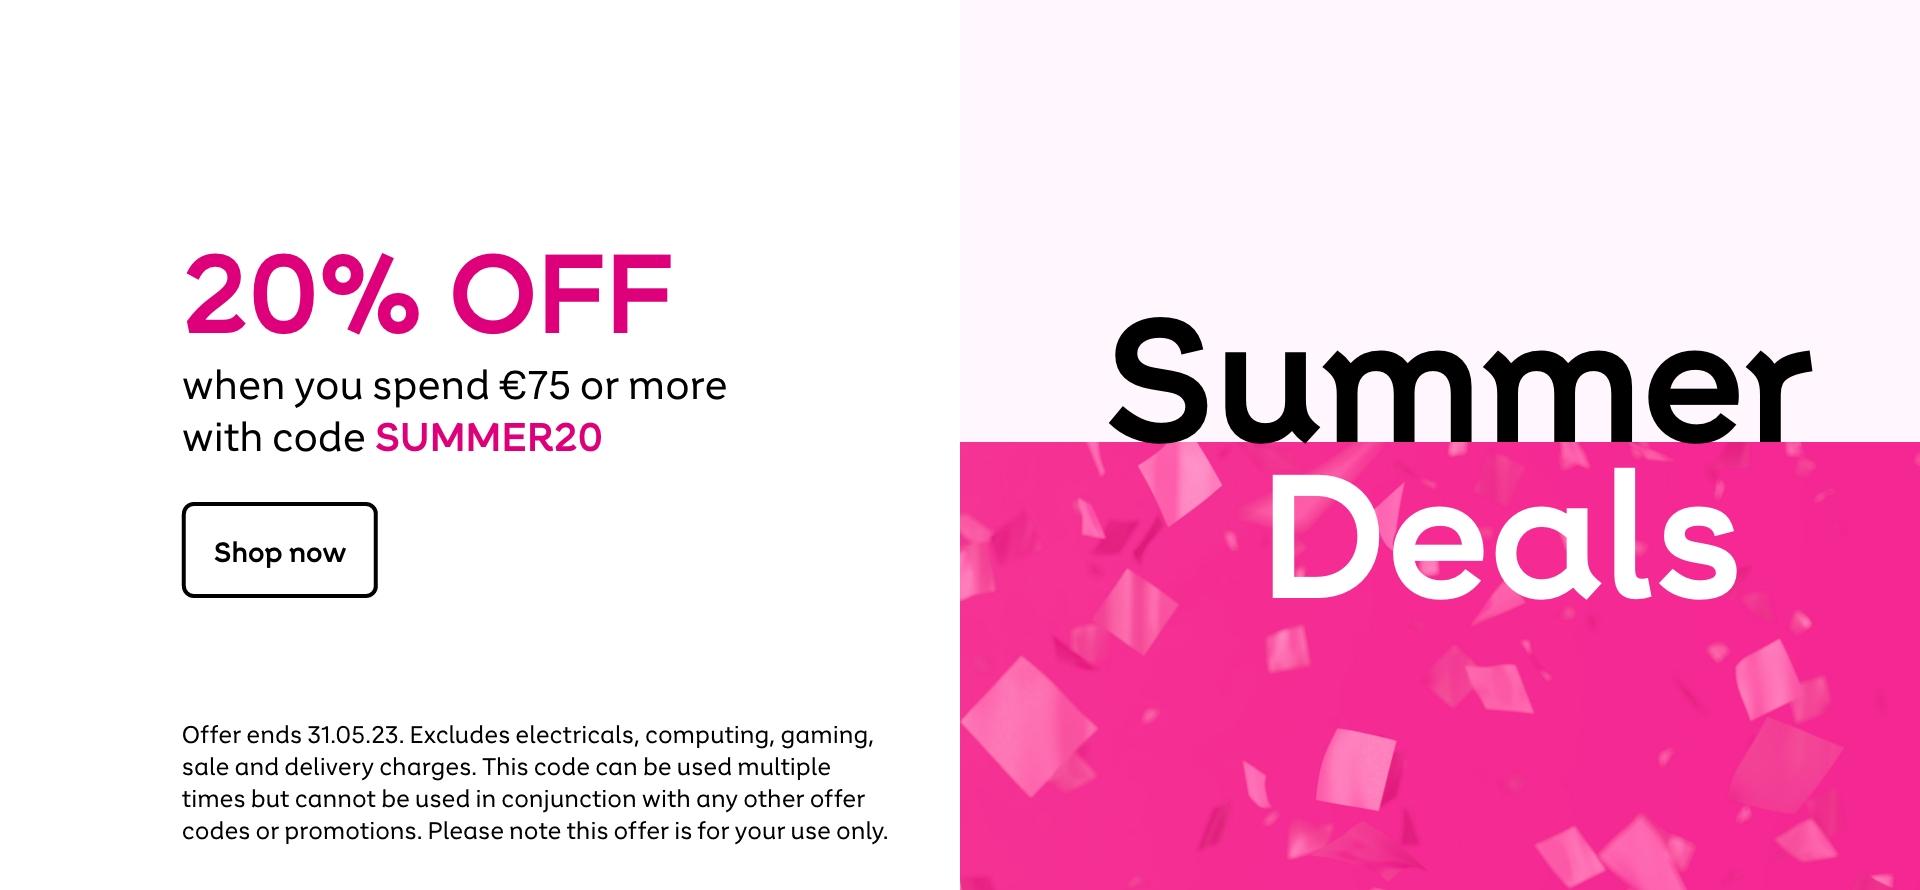 20% off when you spend €75 or more with code SUMMER20. Shop now. Offer ends 31.05.23. Terms & conditions apply.